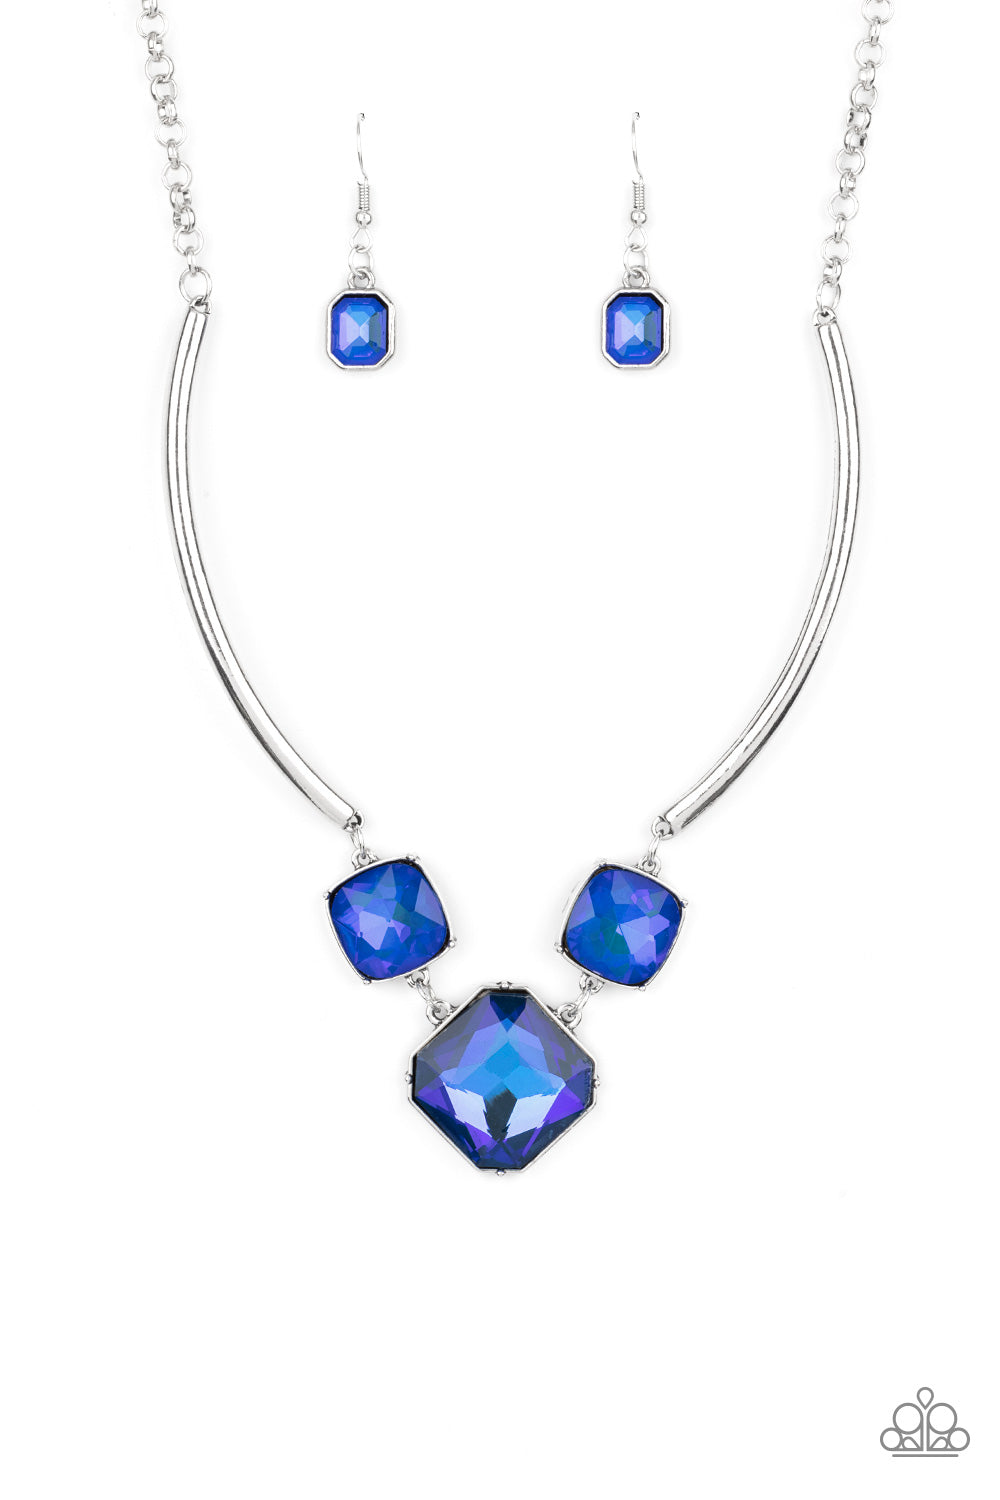 Divine IRIDESCENCE - Blue Necklace Set October 2021 Life of the Party Exclusive - Princess Glam Shop